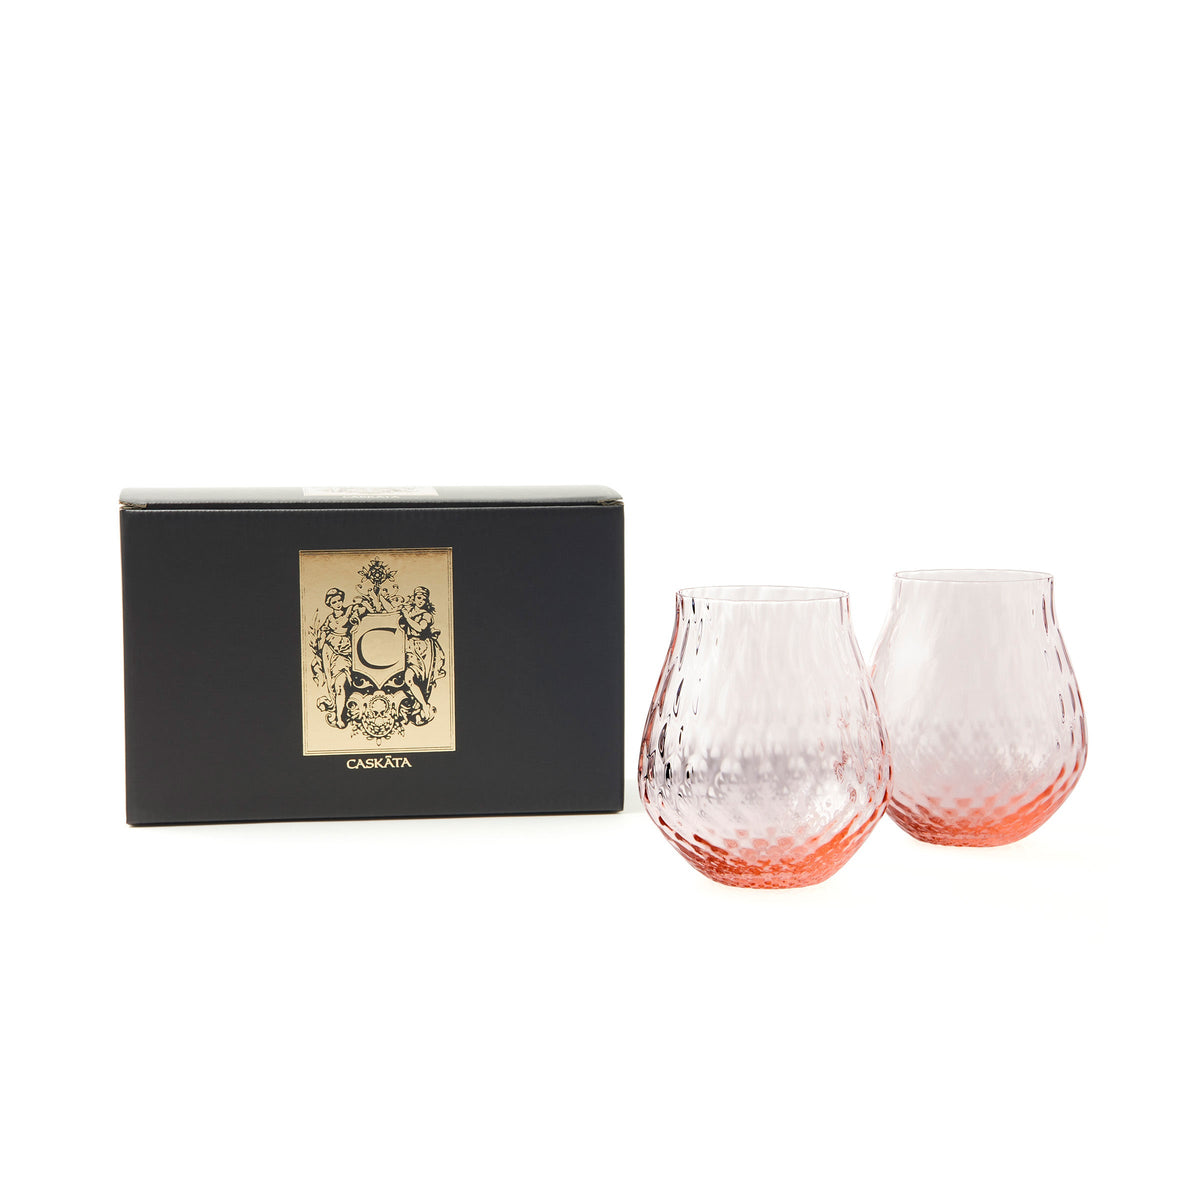 Phoebe rose pink mouth-blown optic crystal tumblers from Caskata.